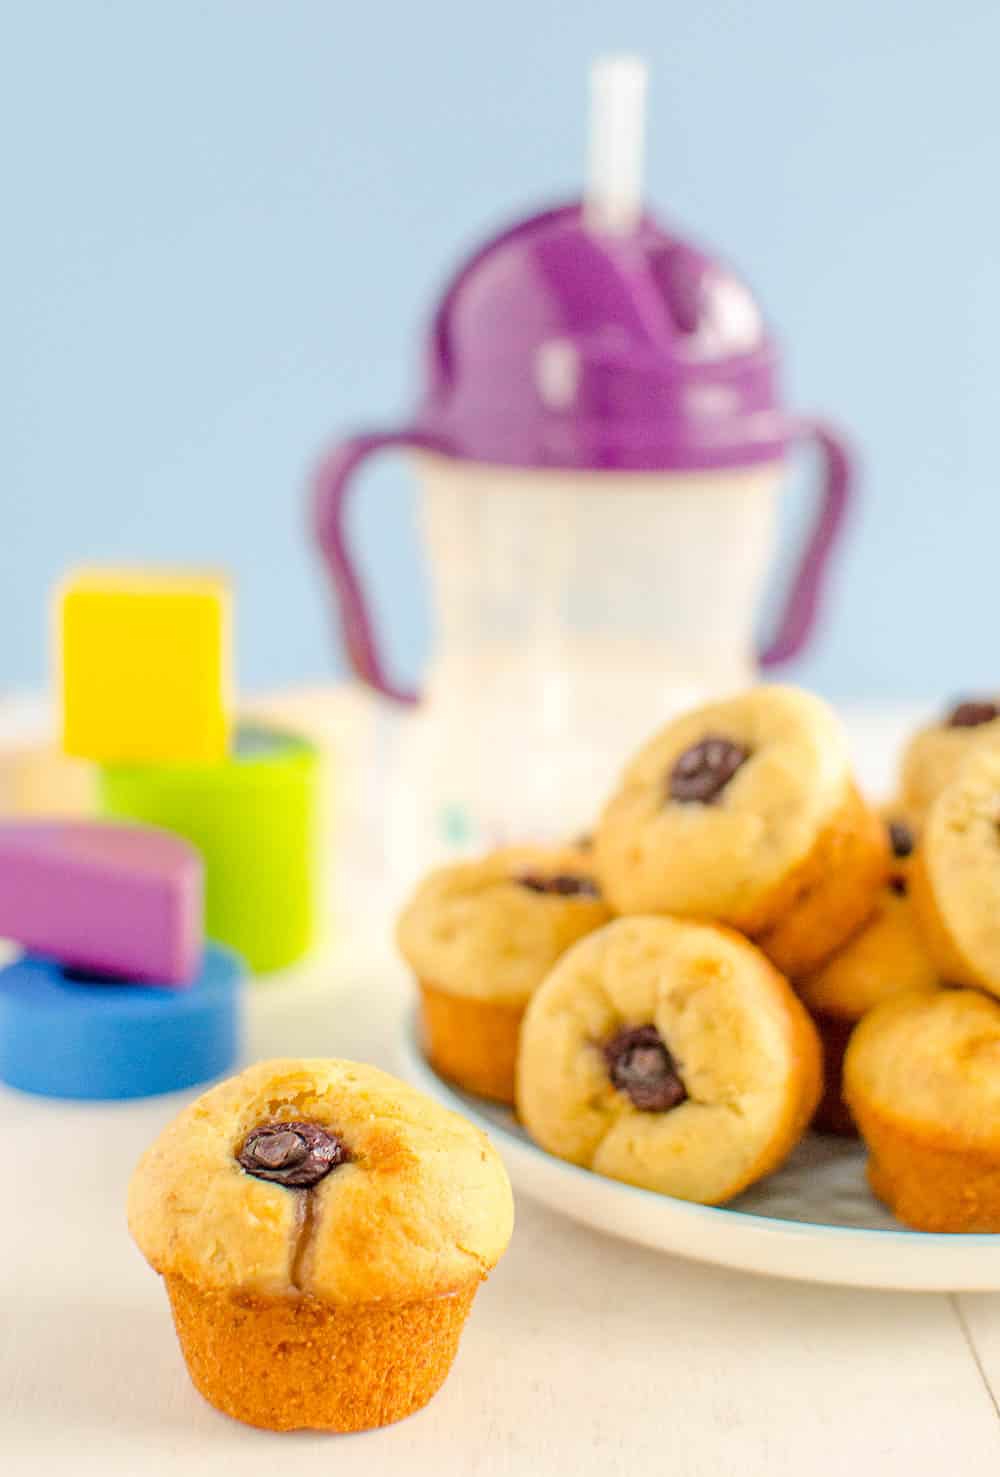 A plate full of banana blueberry muffins with colourful building blocks and a childs cup